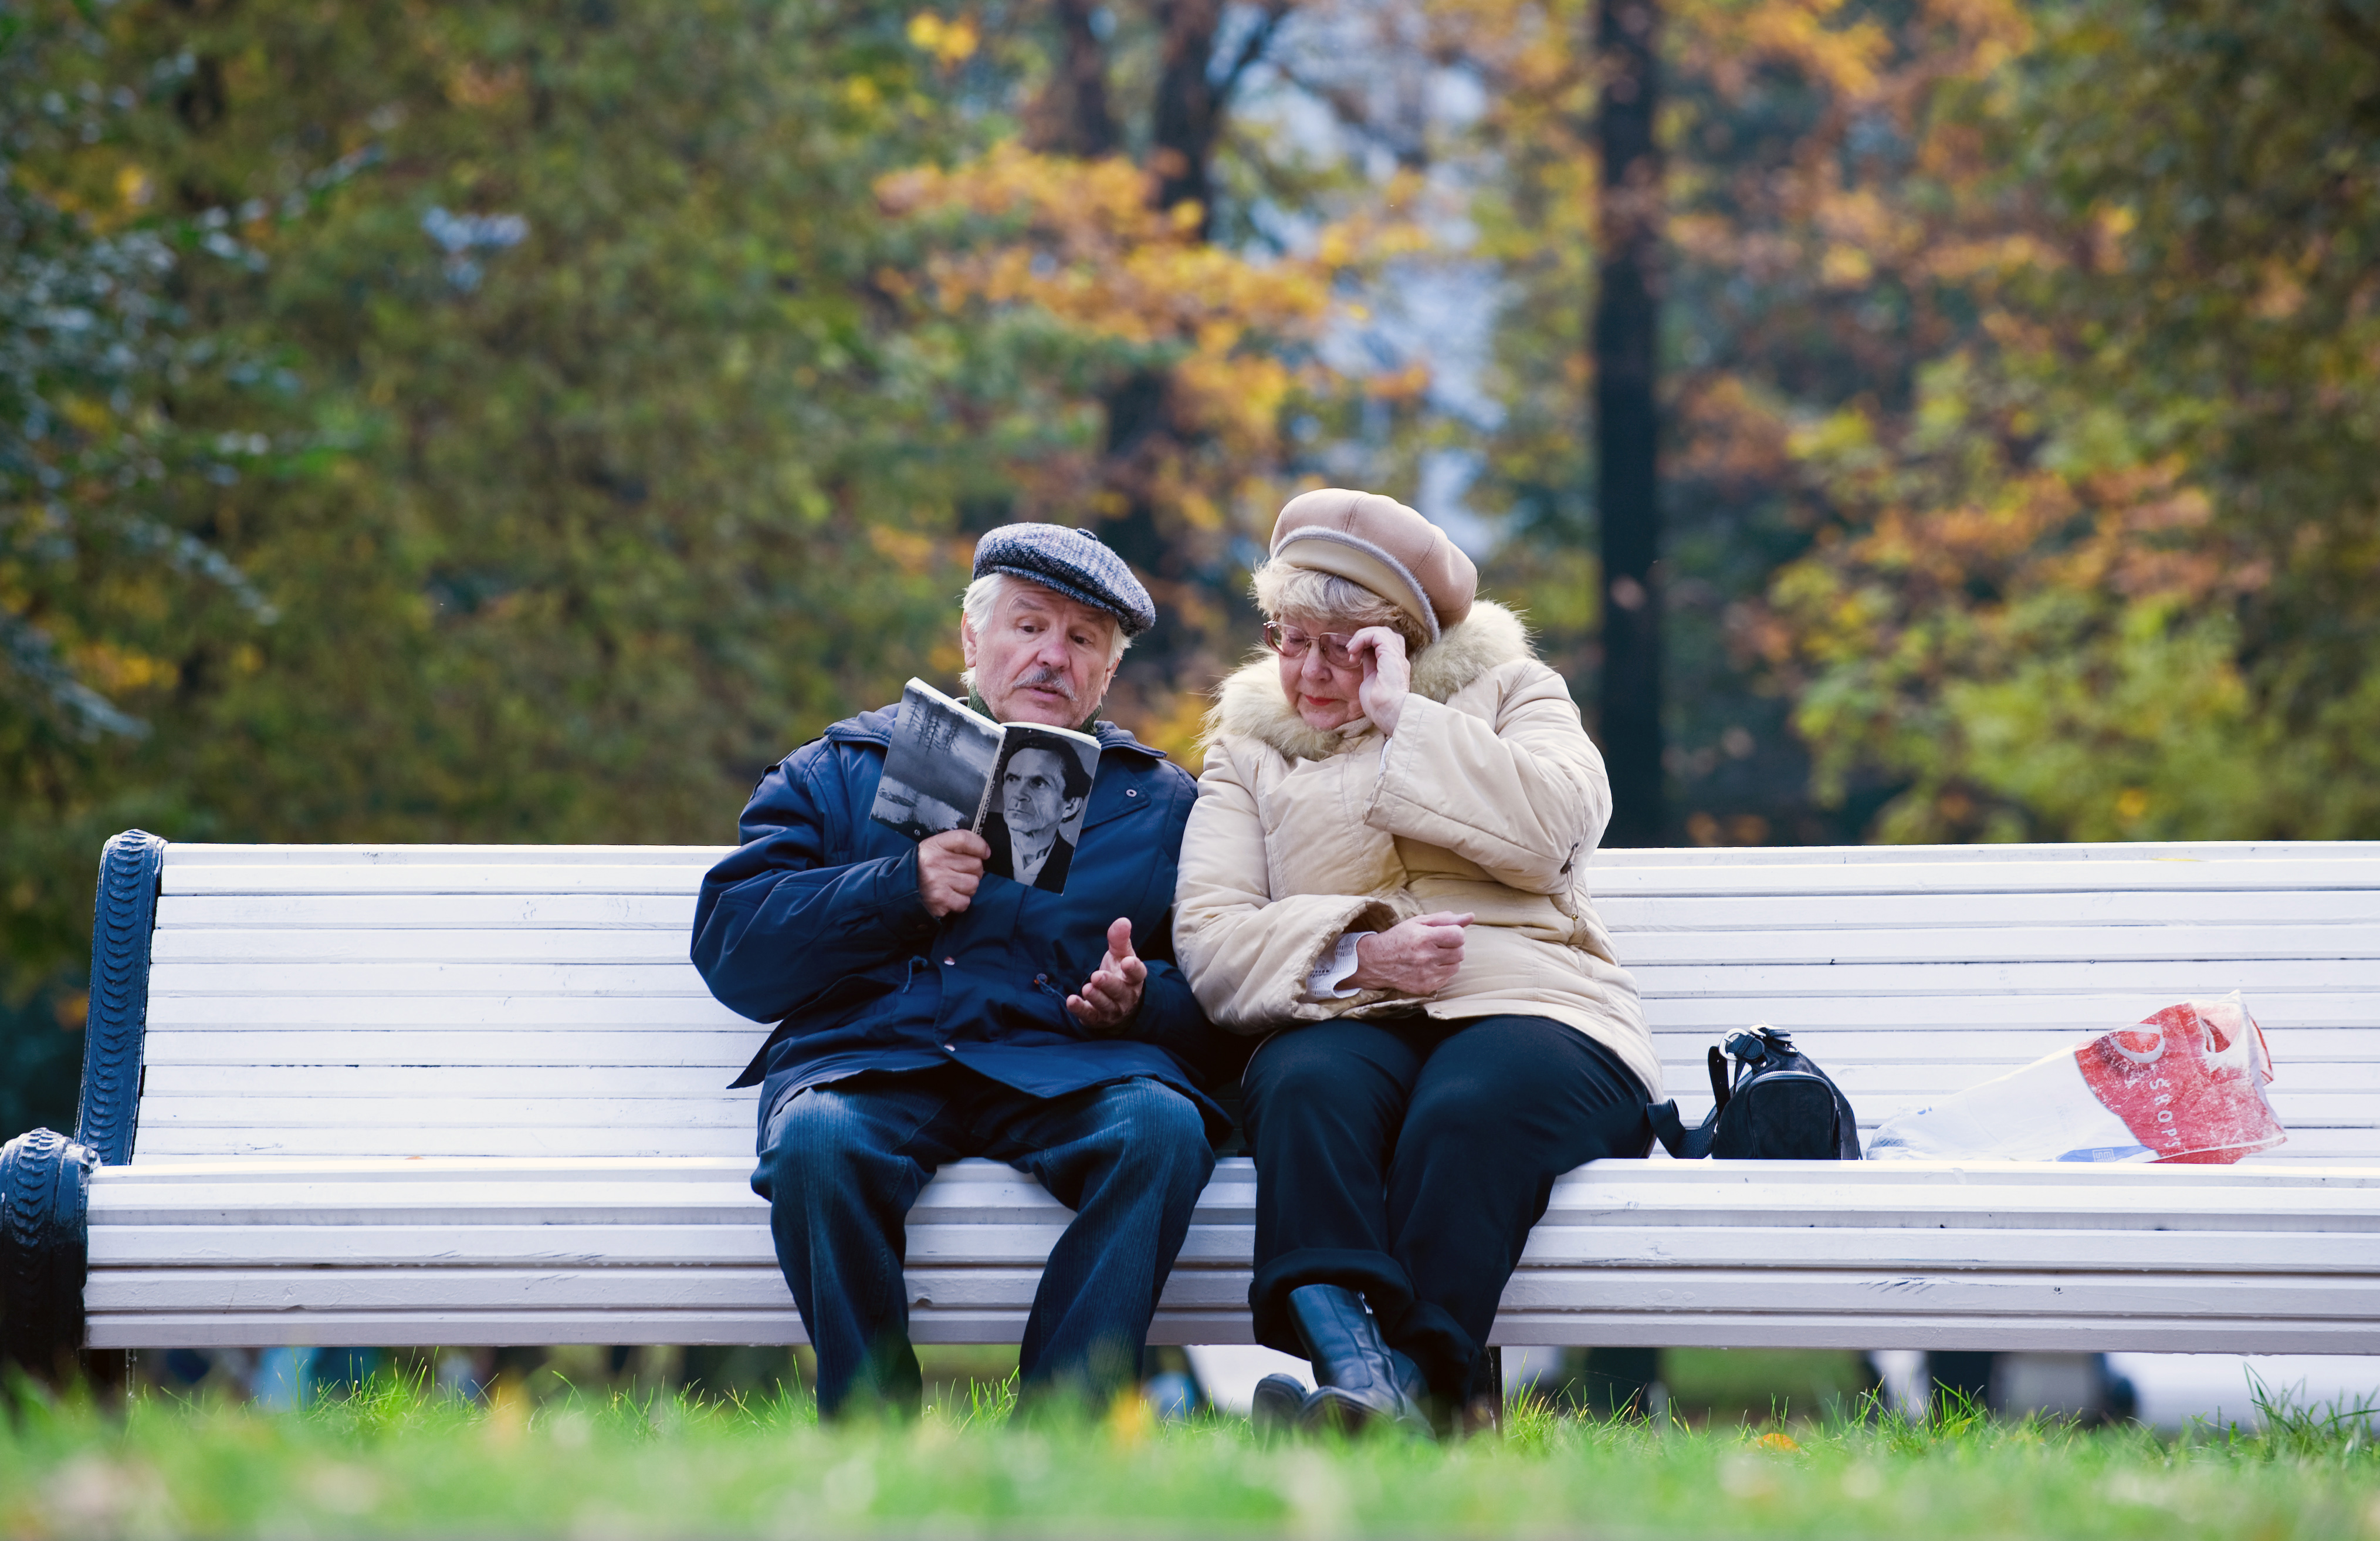 A man and a woman sit on a bench looking at a book